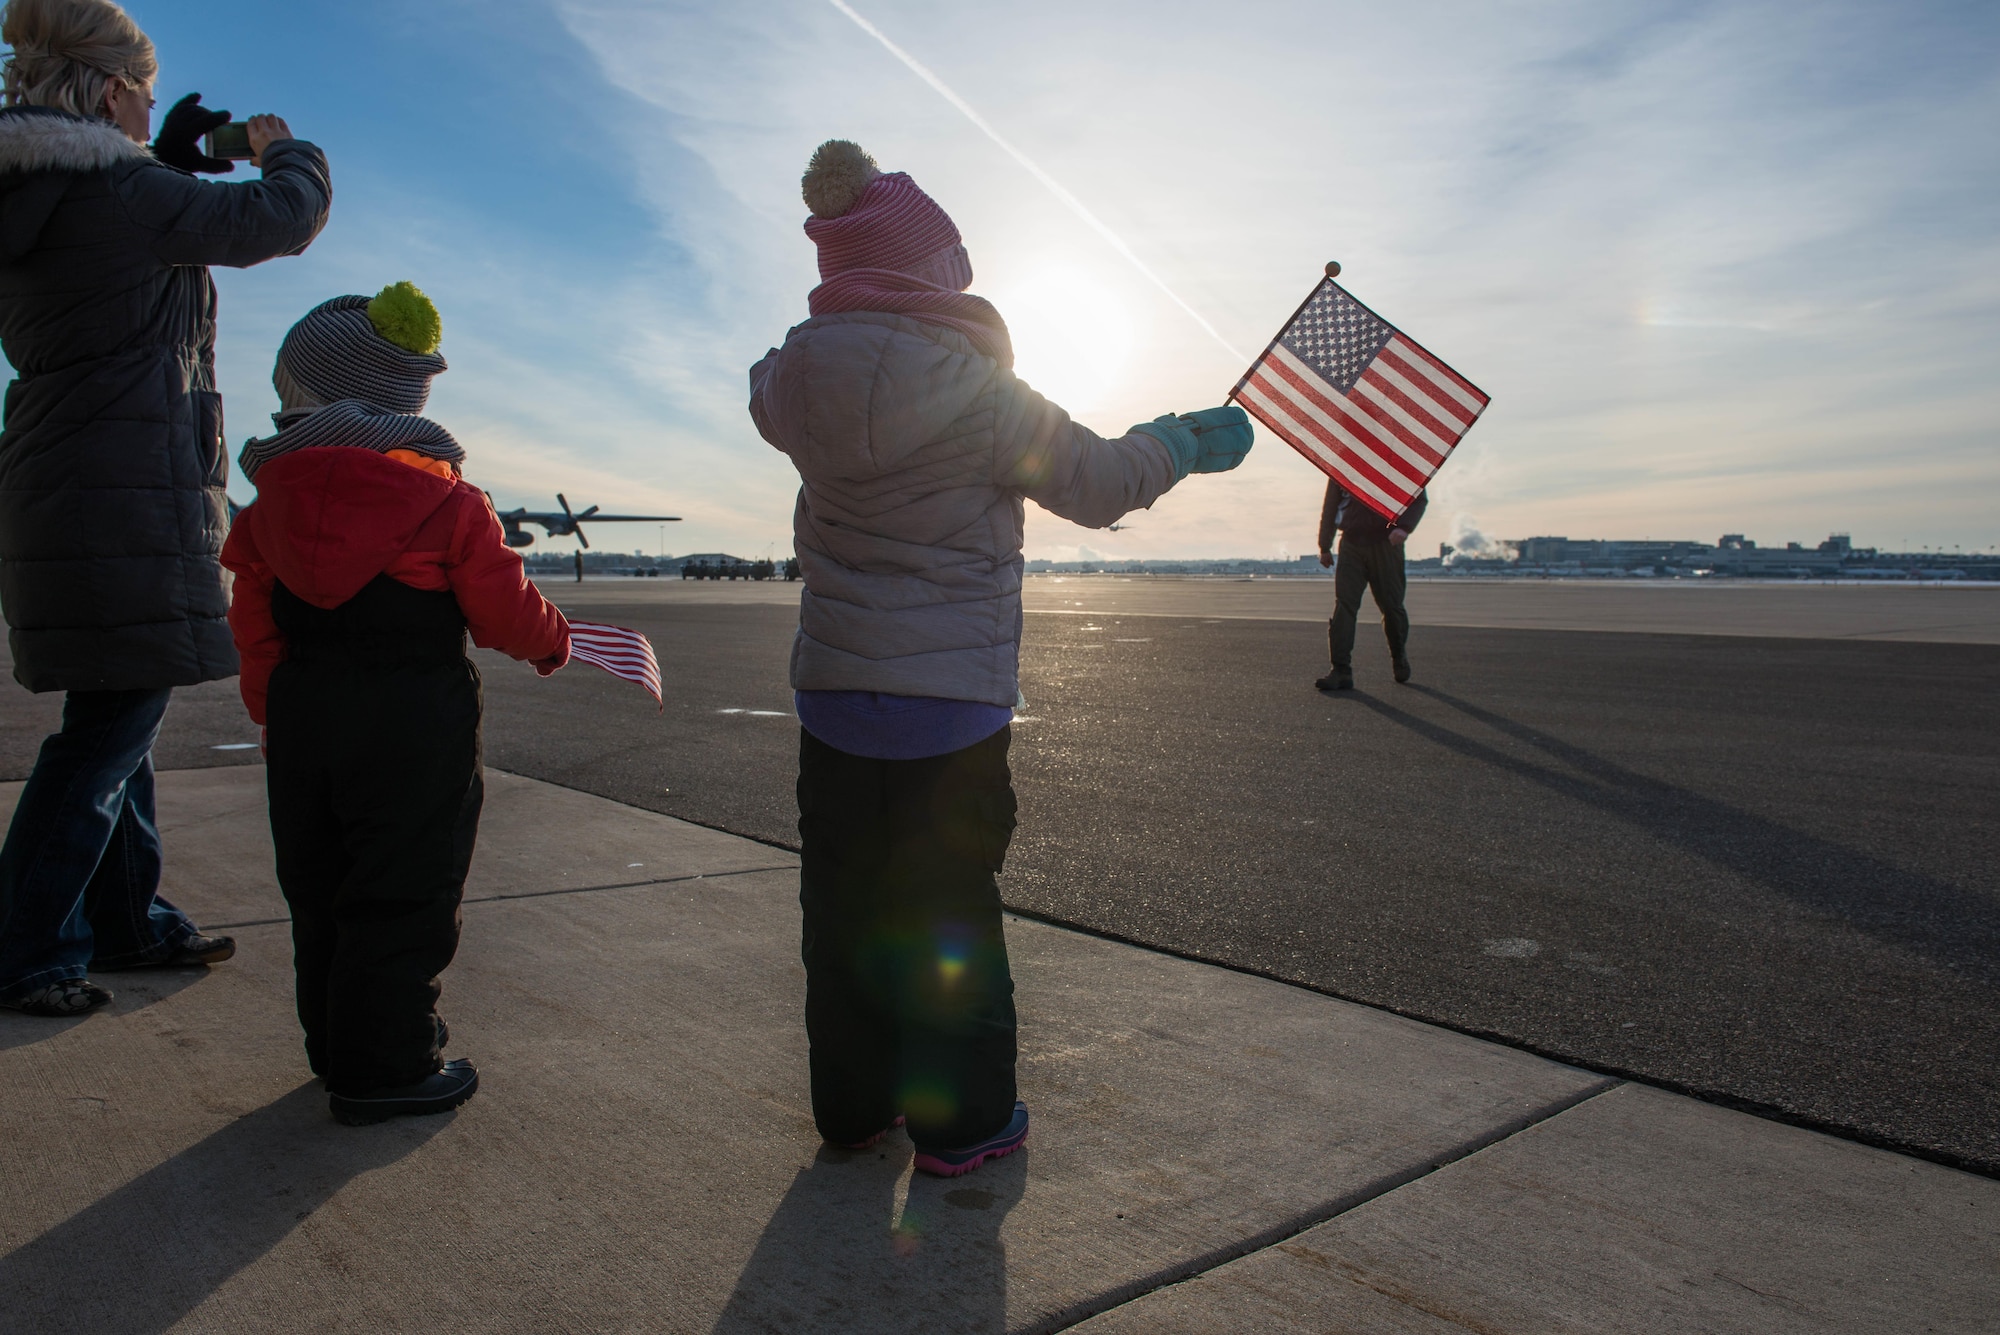 Kyra Dolby and her children, 3 year-old Bauer and 5 year-old Bentley, watch and wave to Kyra's father, Lt. Col. Don Petros as he departs for Southwest Asia on January 8. (U.S. Air Force photo by Tech. Sgt. Trevor Saylor)